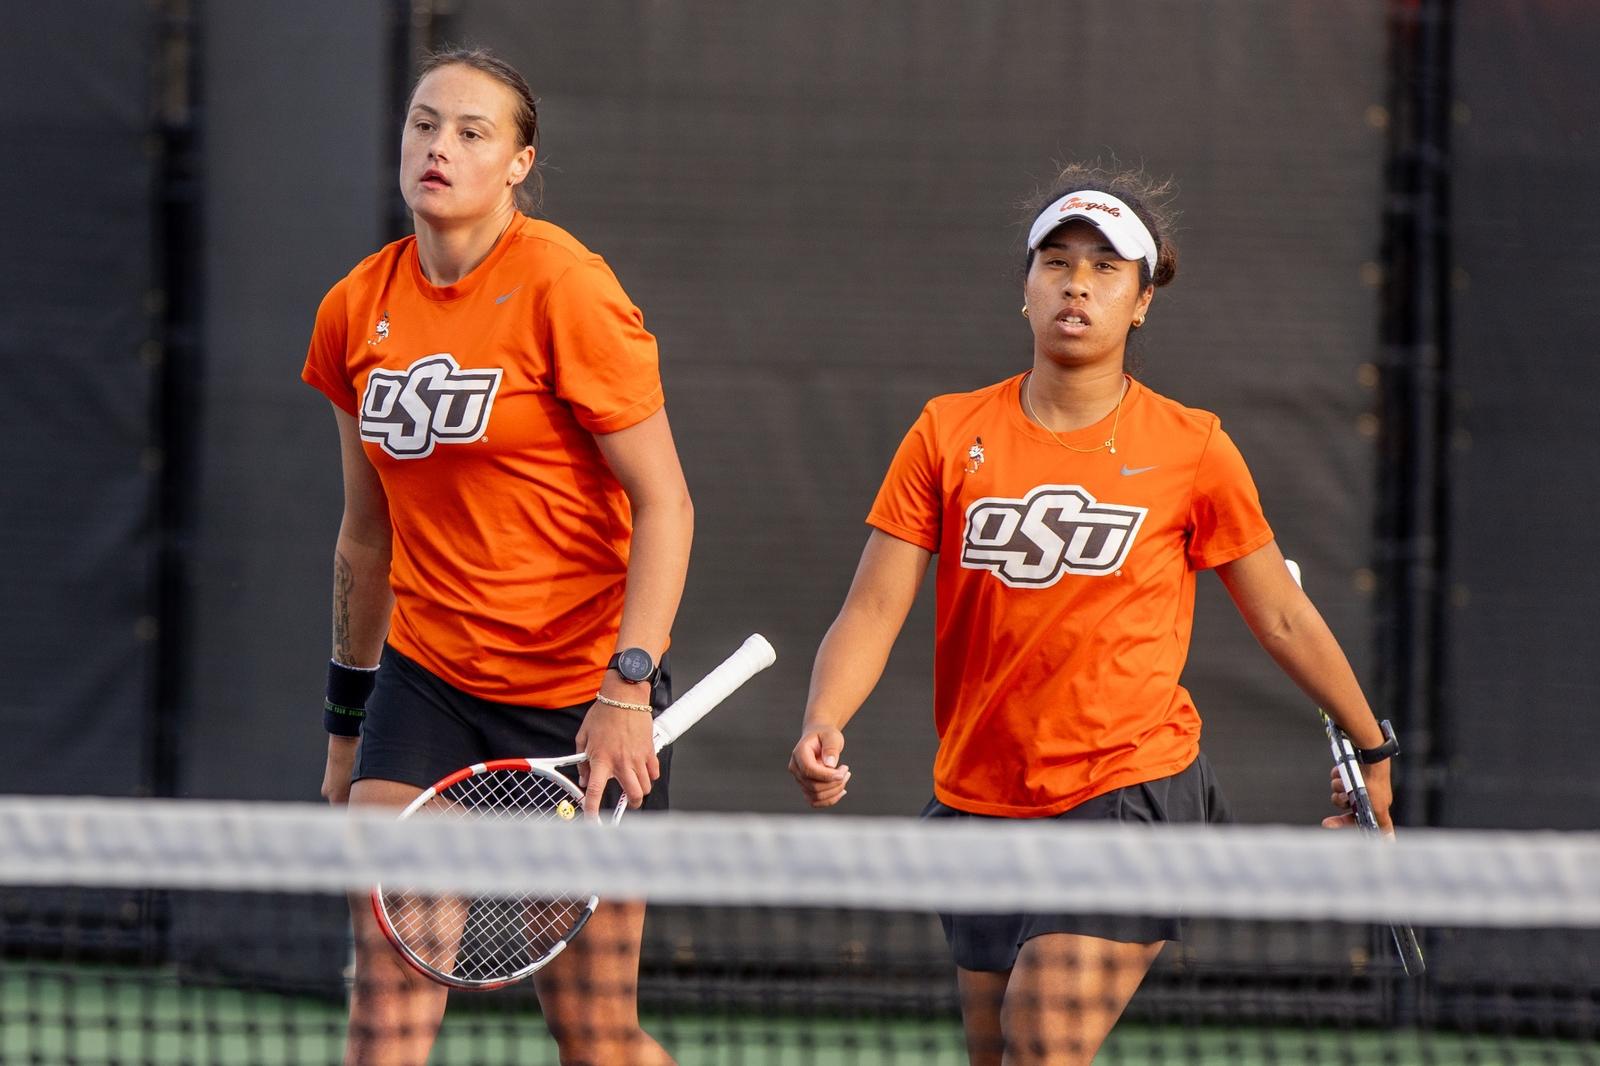 Cowgirls Remain No. 1 in ITA Rankings After Winning Big 12 Title